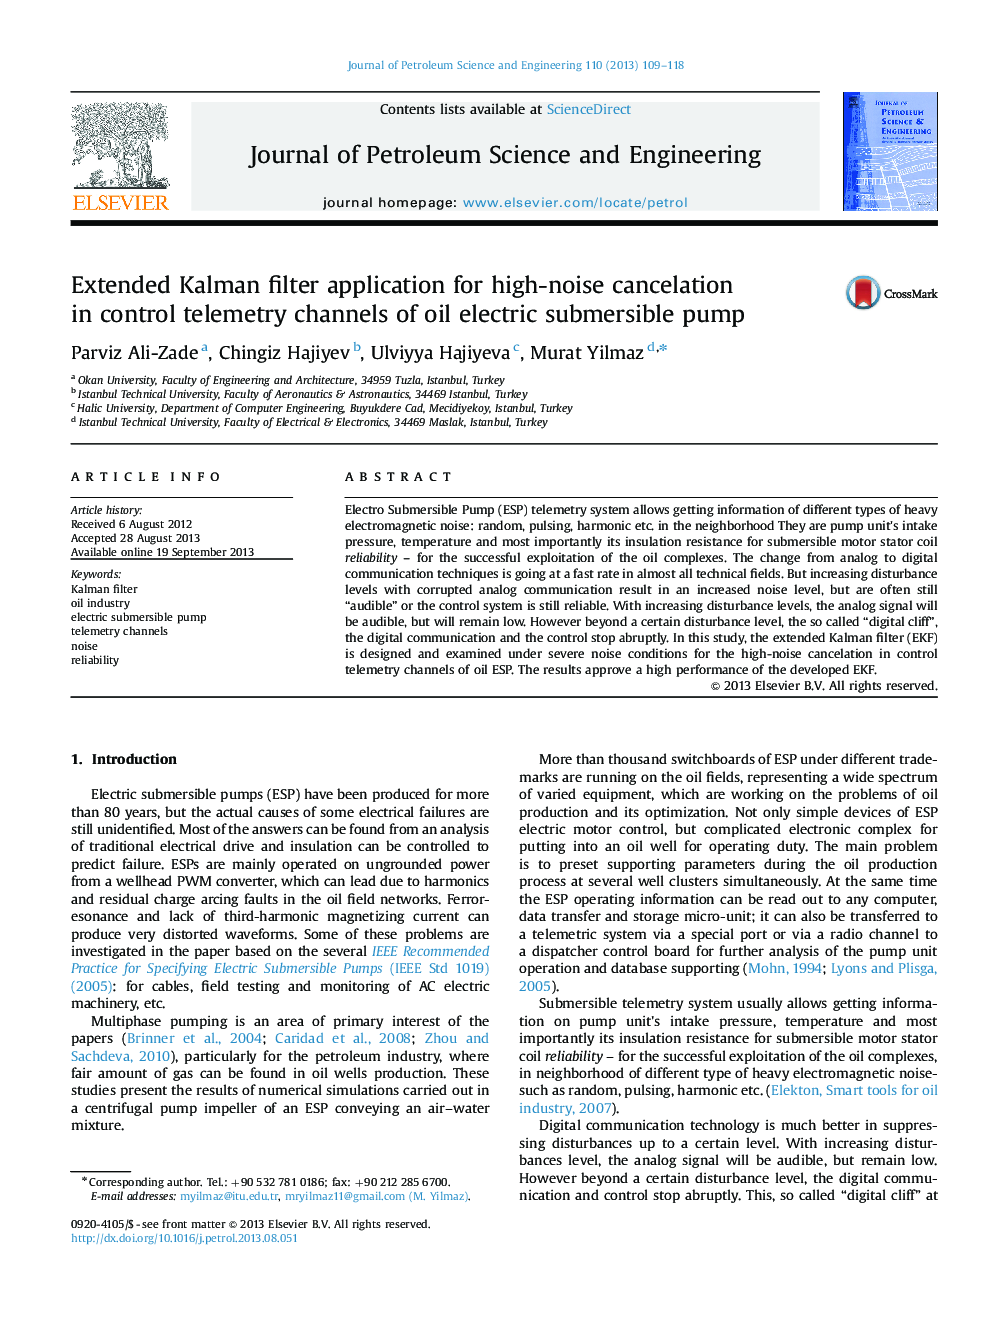 Extended Kalman filter application for high-noise cancelation in control telemetry channels of oil electric submersible pump